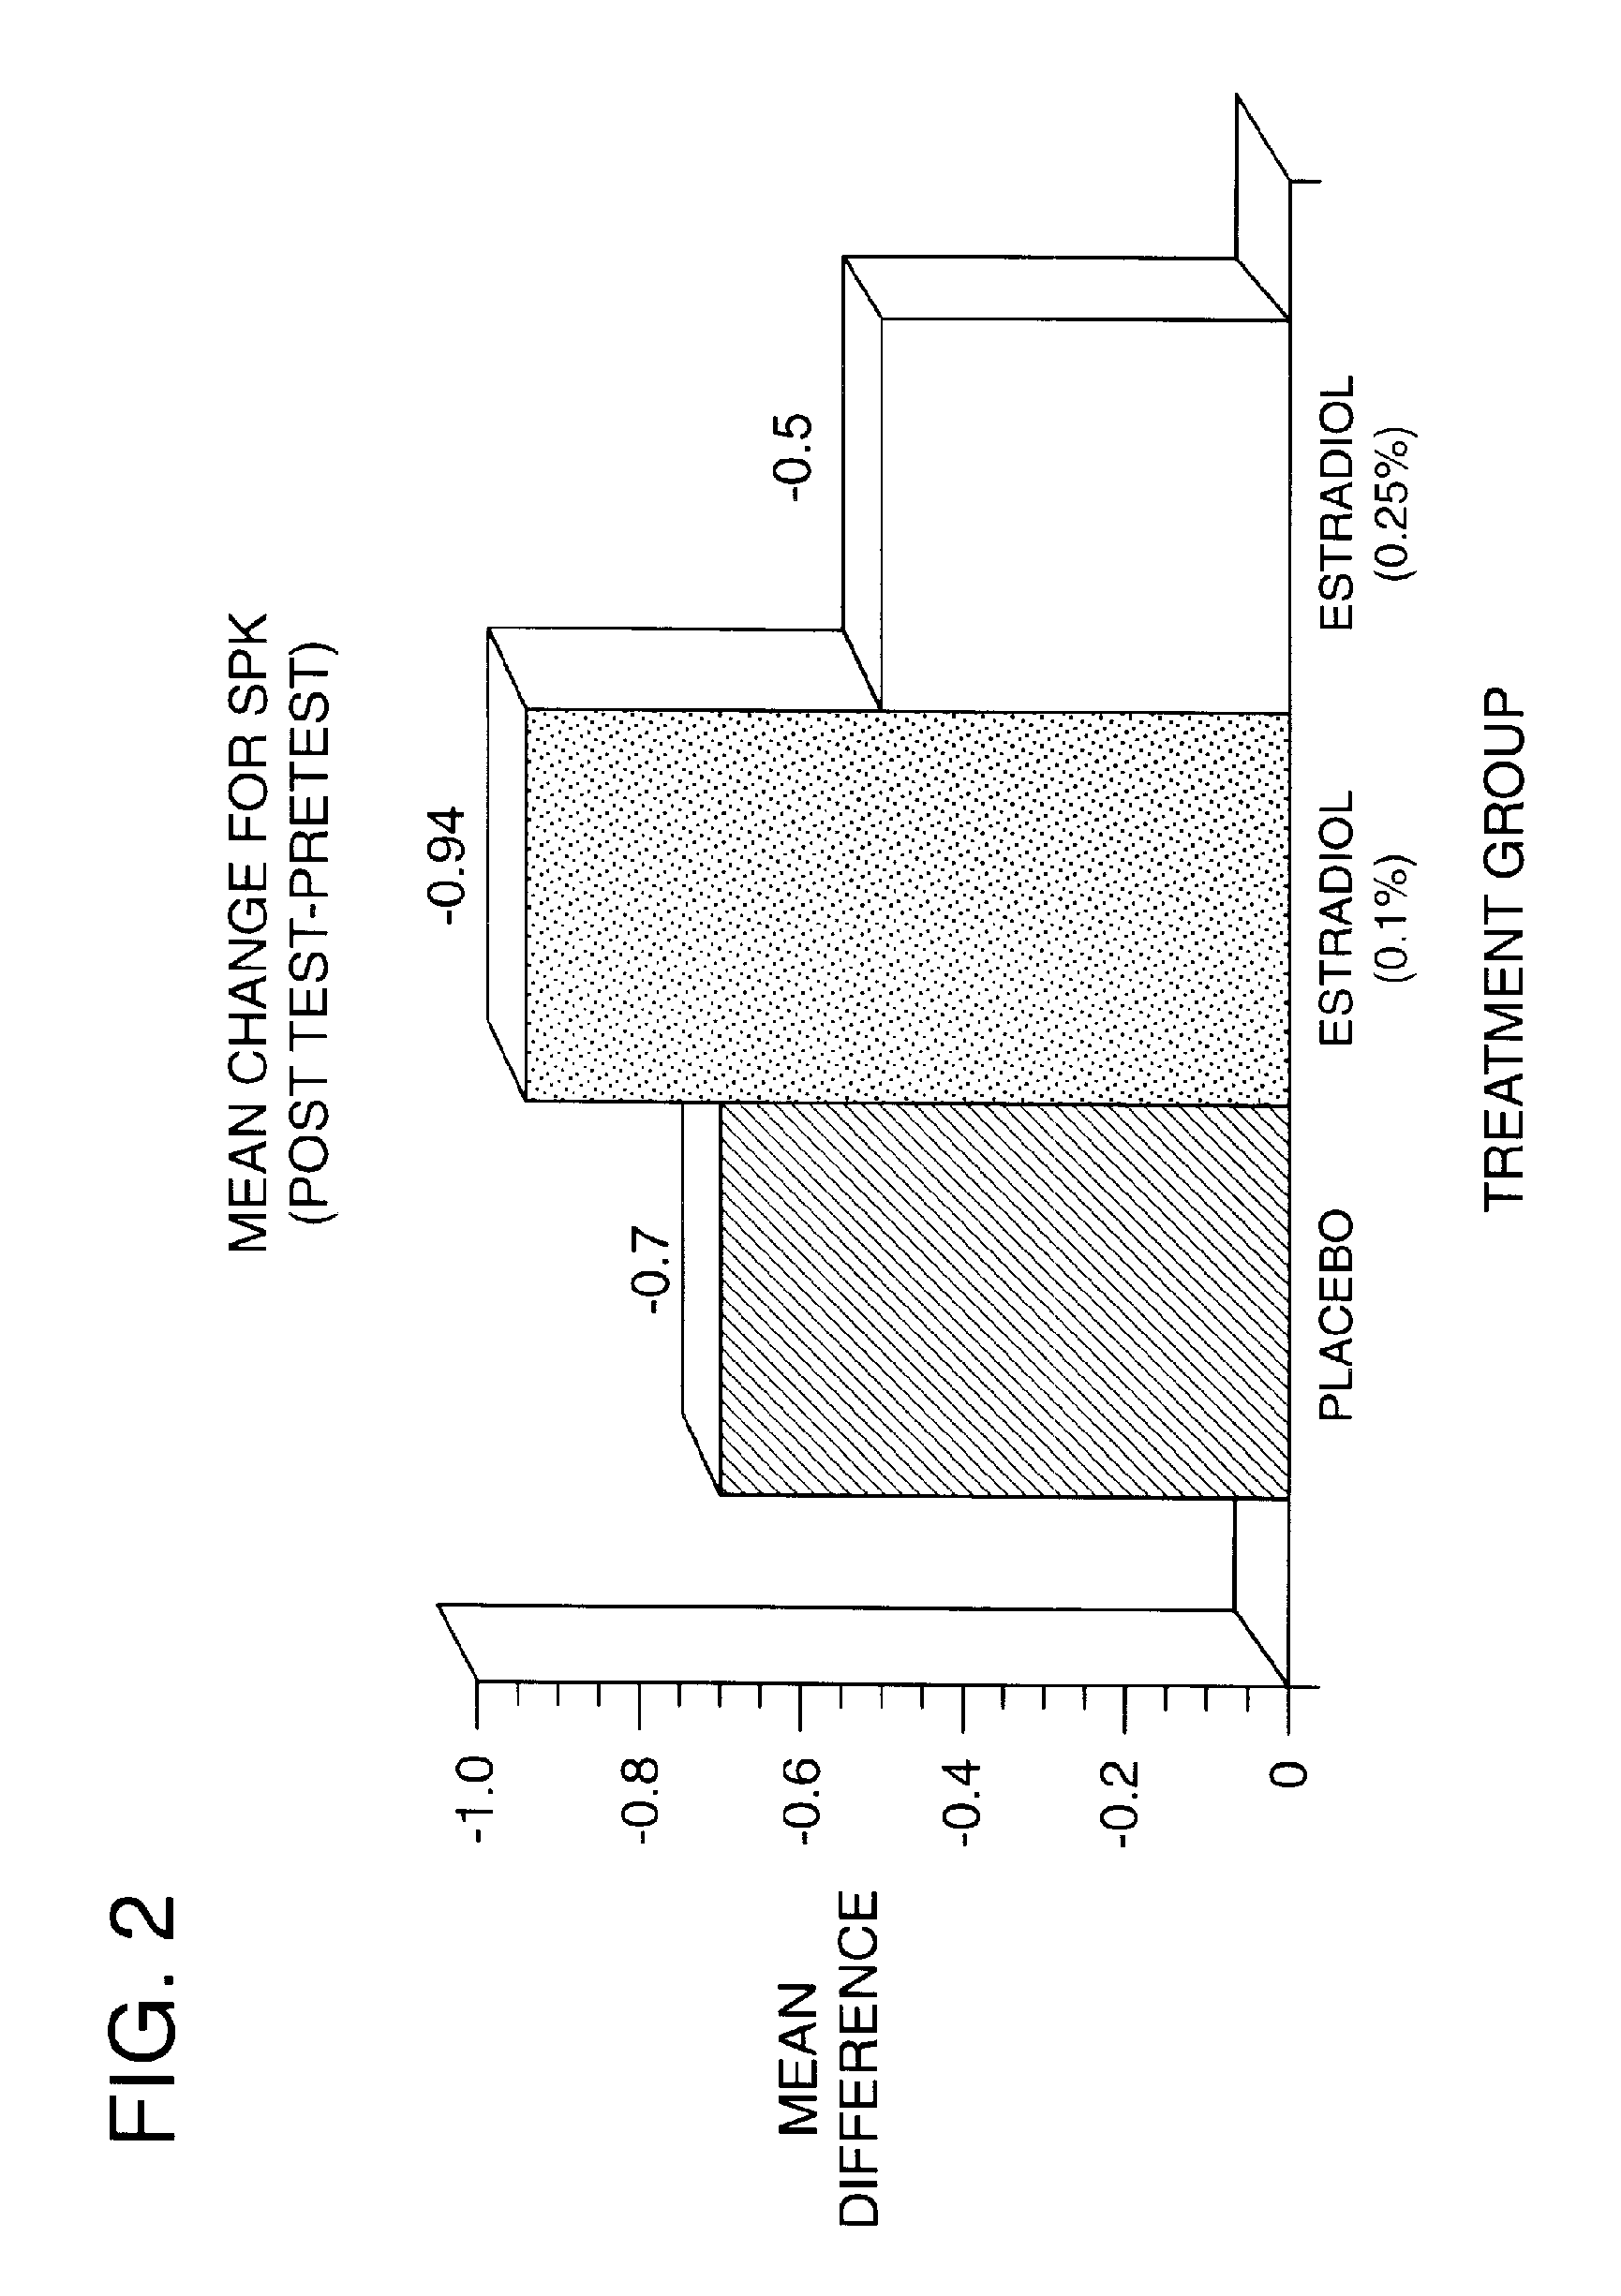 Time-release and micro-dose formulations for topical application of estrogen and estrogen analogs or other estrogen receptor modulators in the treatment of dry eye syndrome, and methods of preparation and application